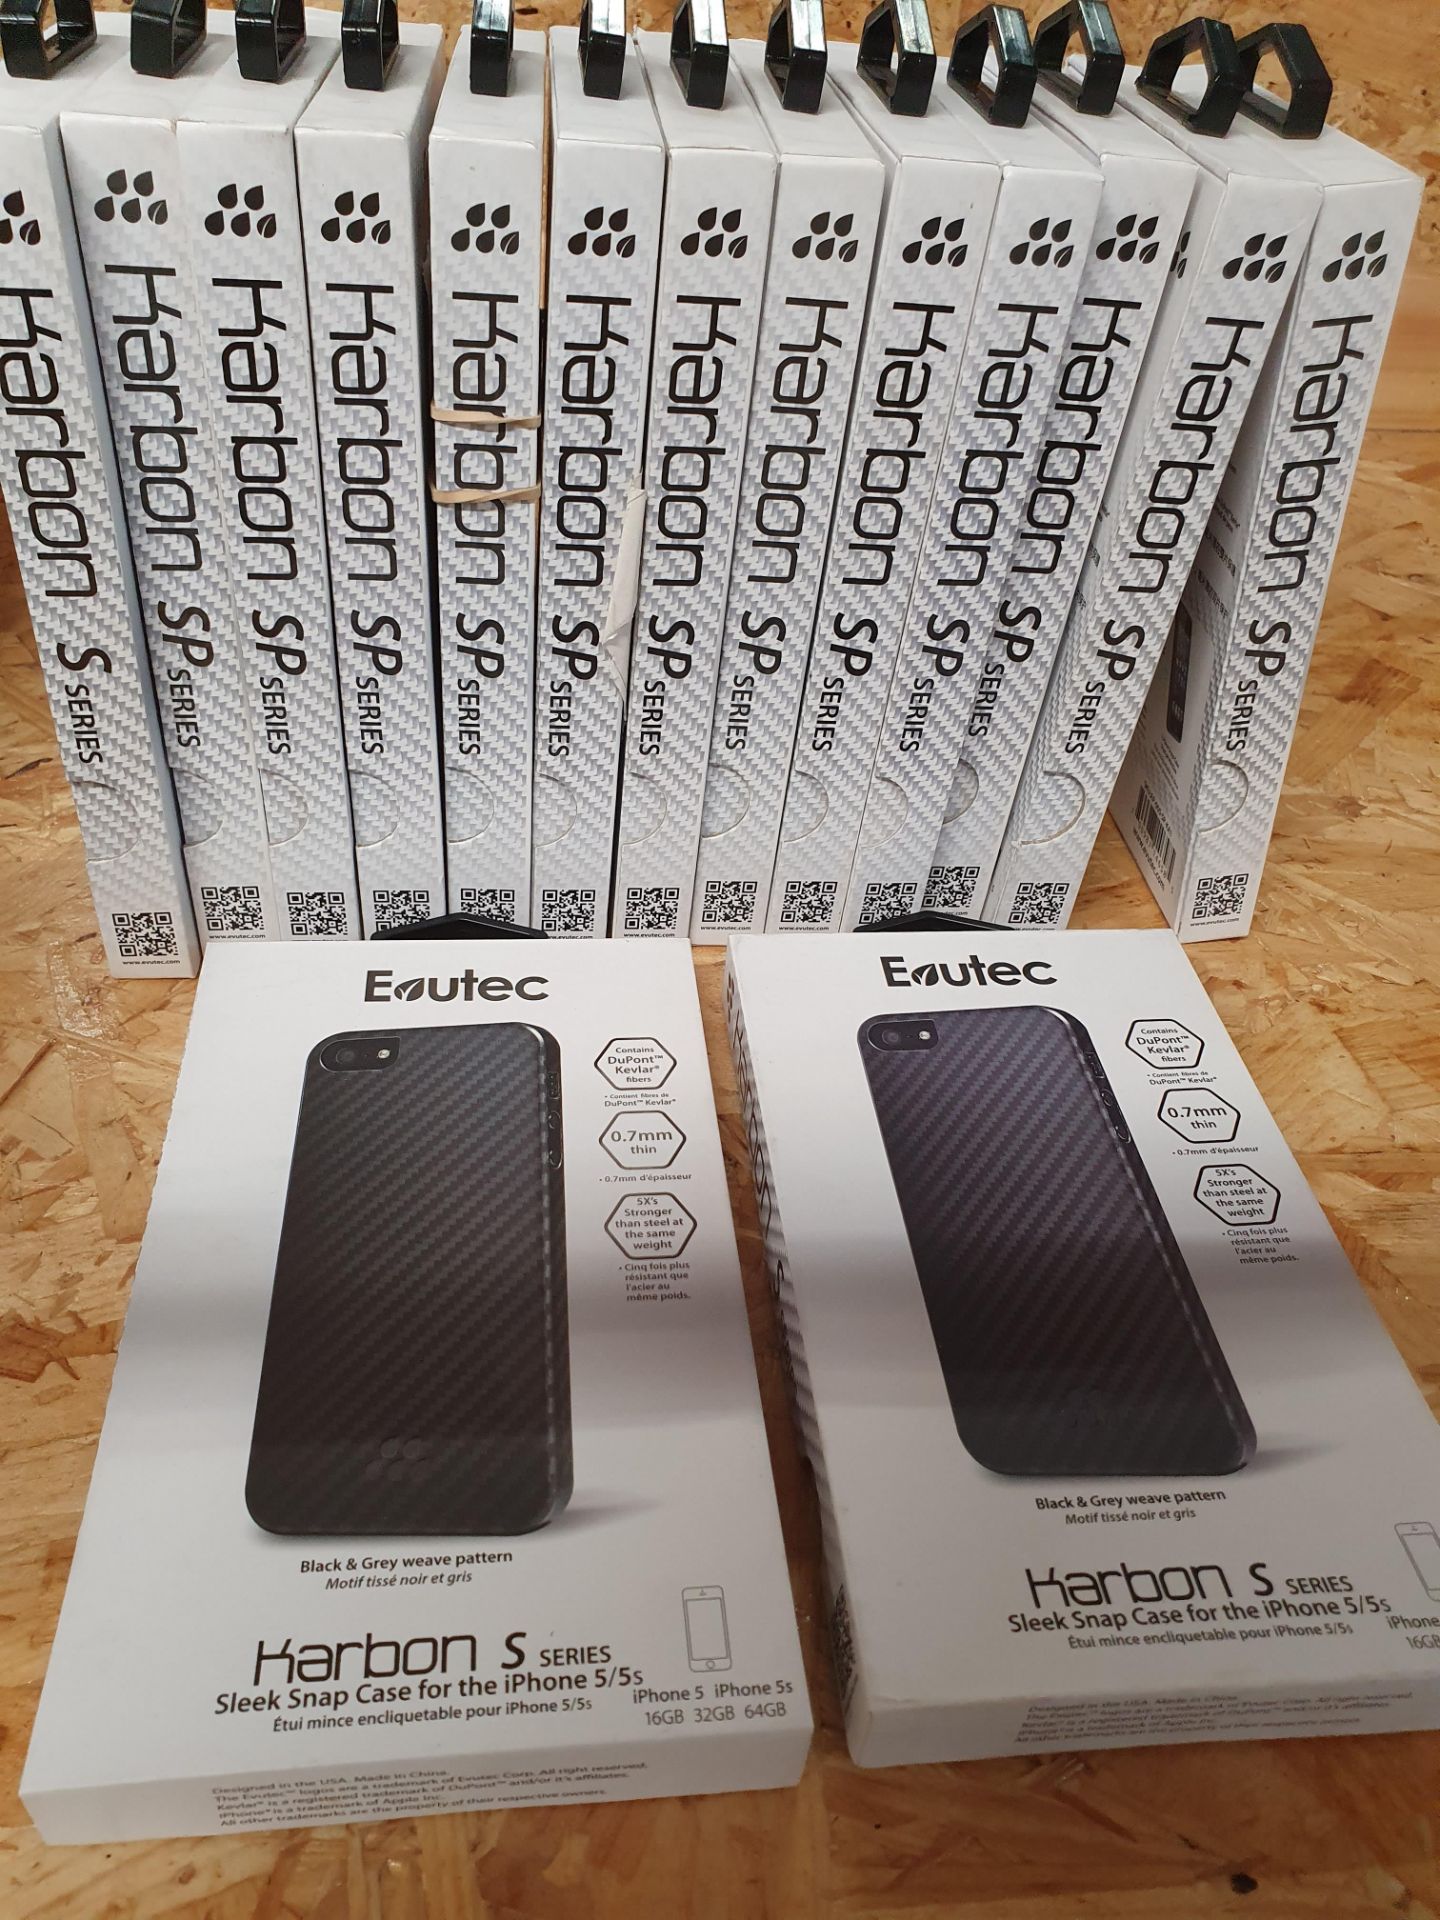 ONE LOT TO CONTAIN MIXED BUNDLE; X30 BOXED 'EVUTEC KARBON S BLACK' IPHONE SE / 5 / 5S CASES AND - Image 2 of 3